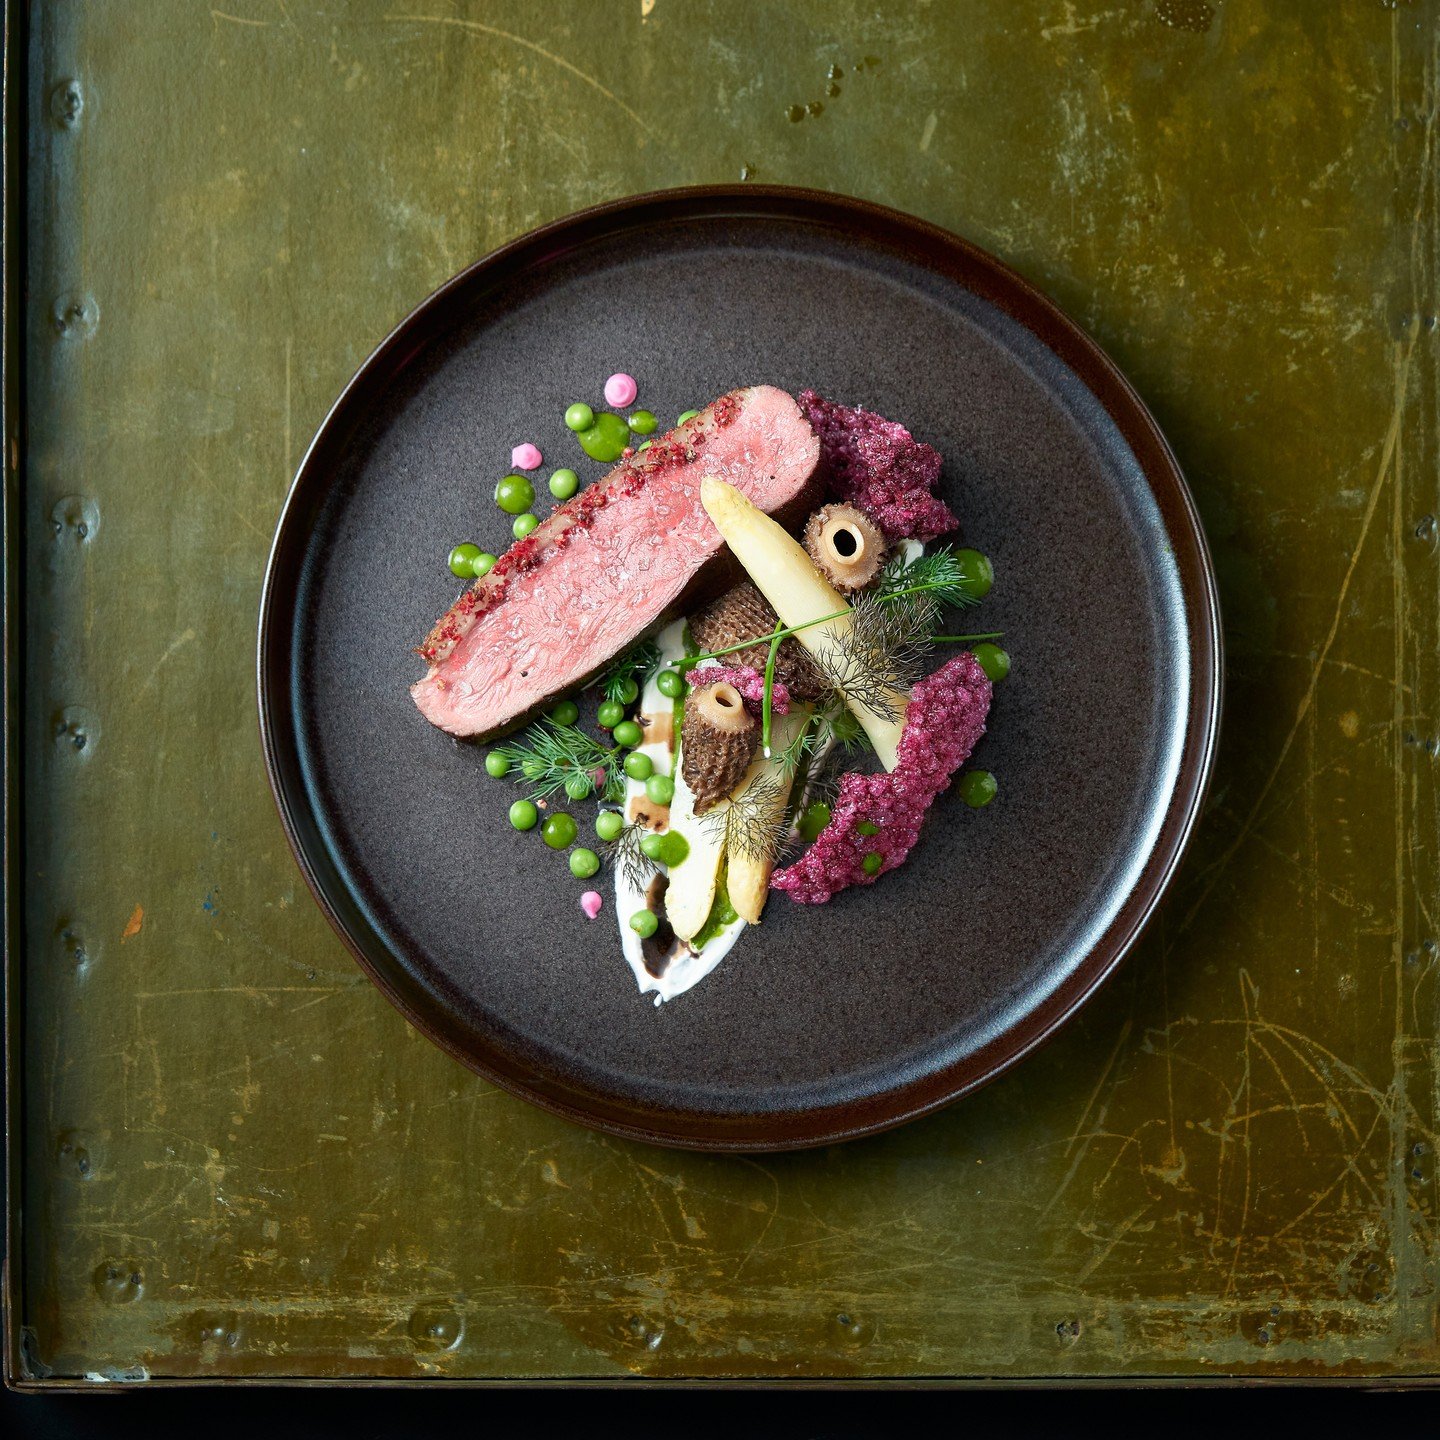 LORD LOVE A DUCK

duck magret + white asparagus + rhubarb
morels + sweet peas + fennel
five spice + pink peppercorn + ginger